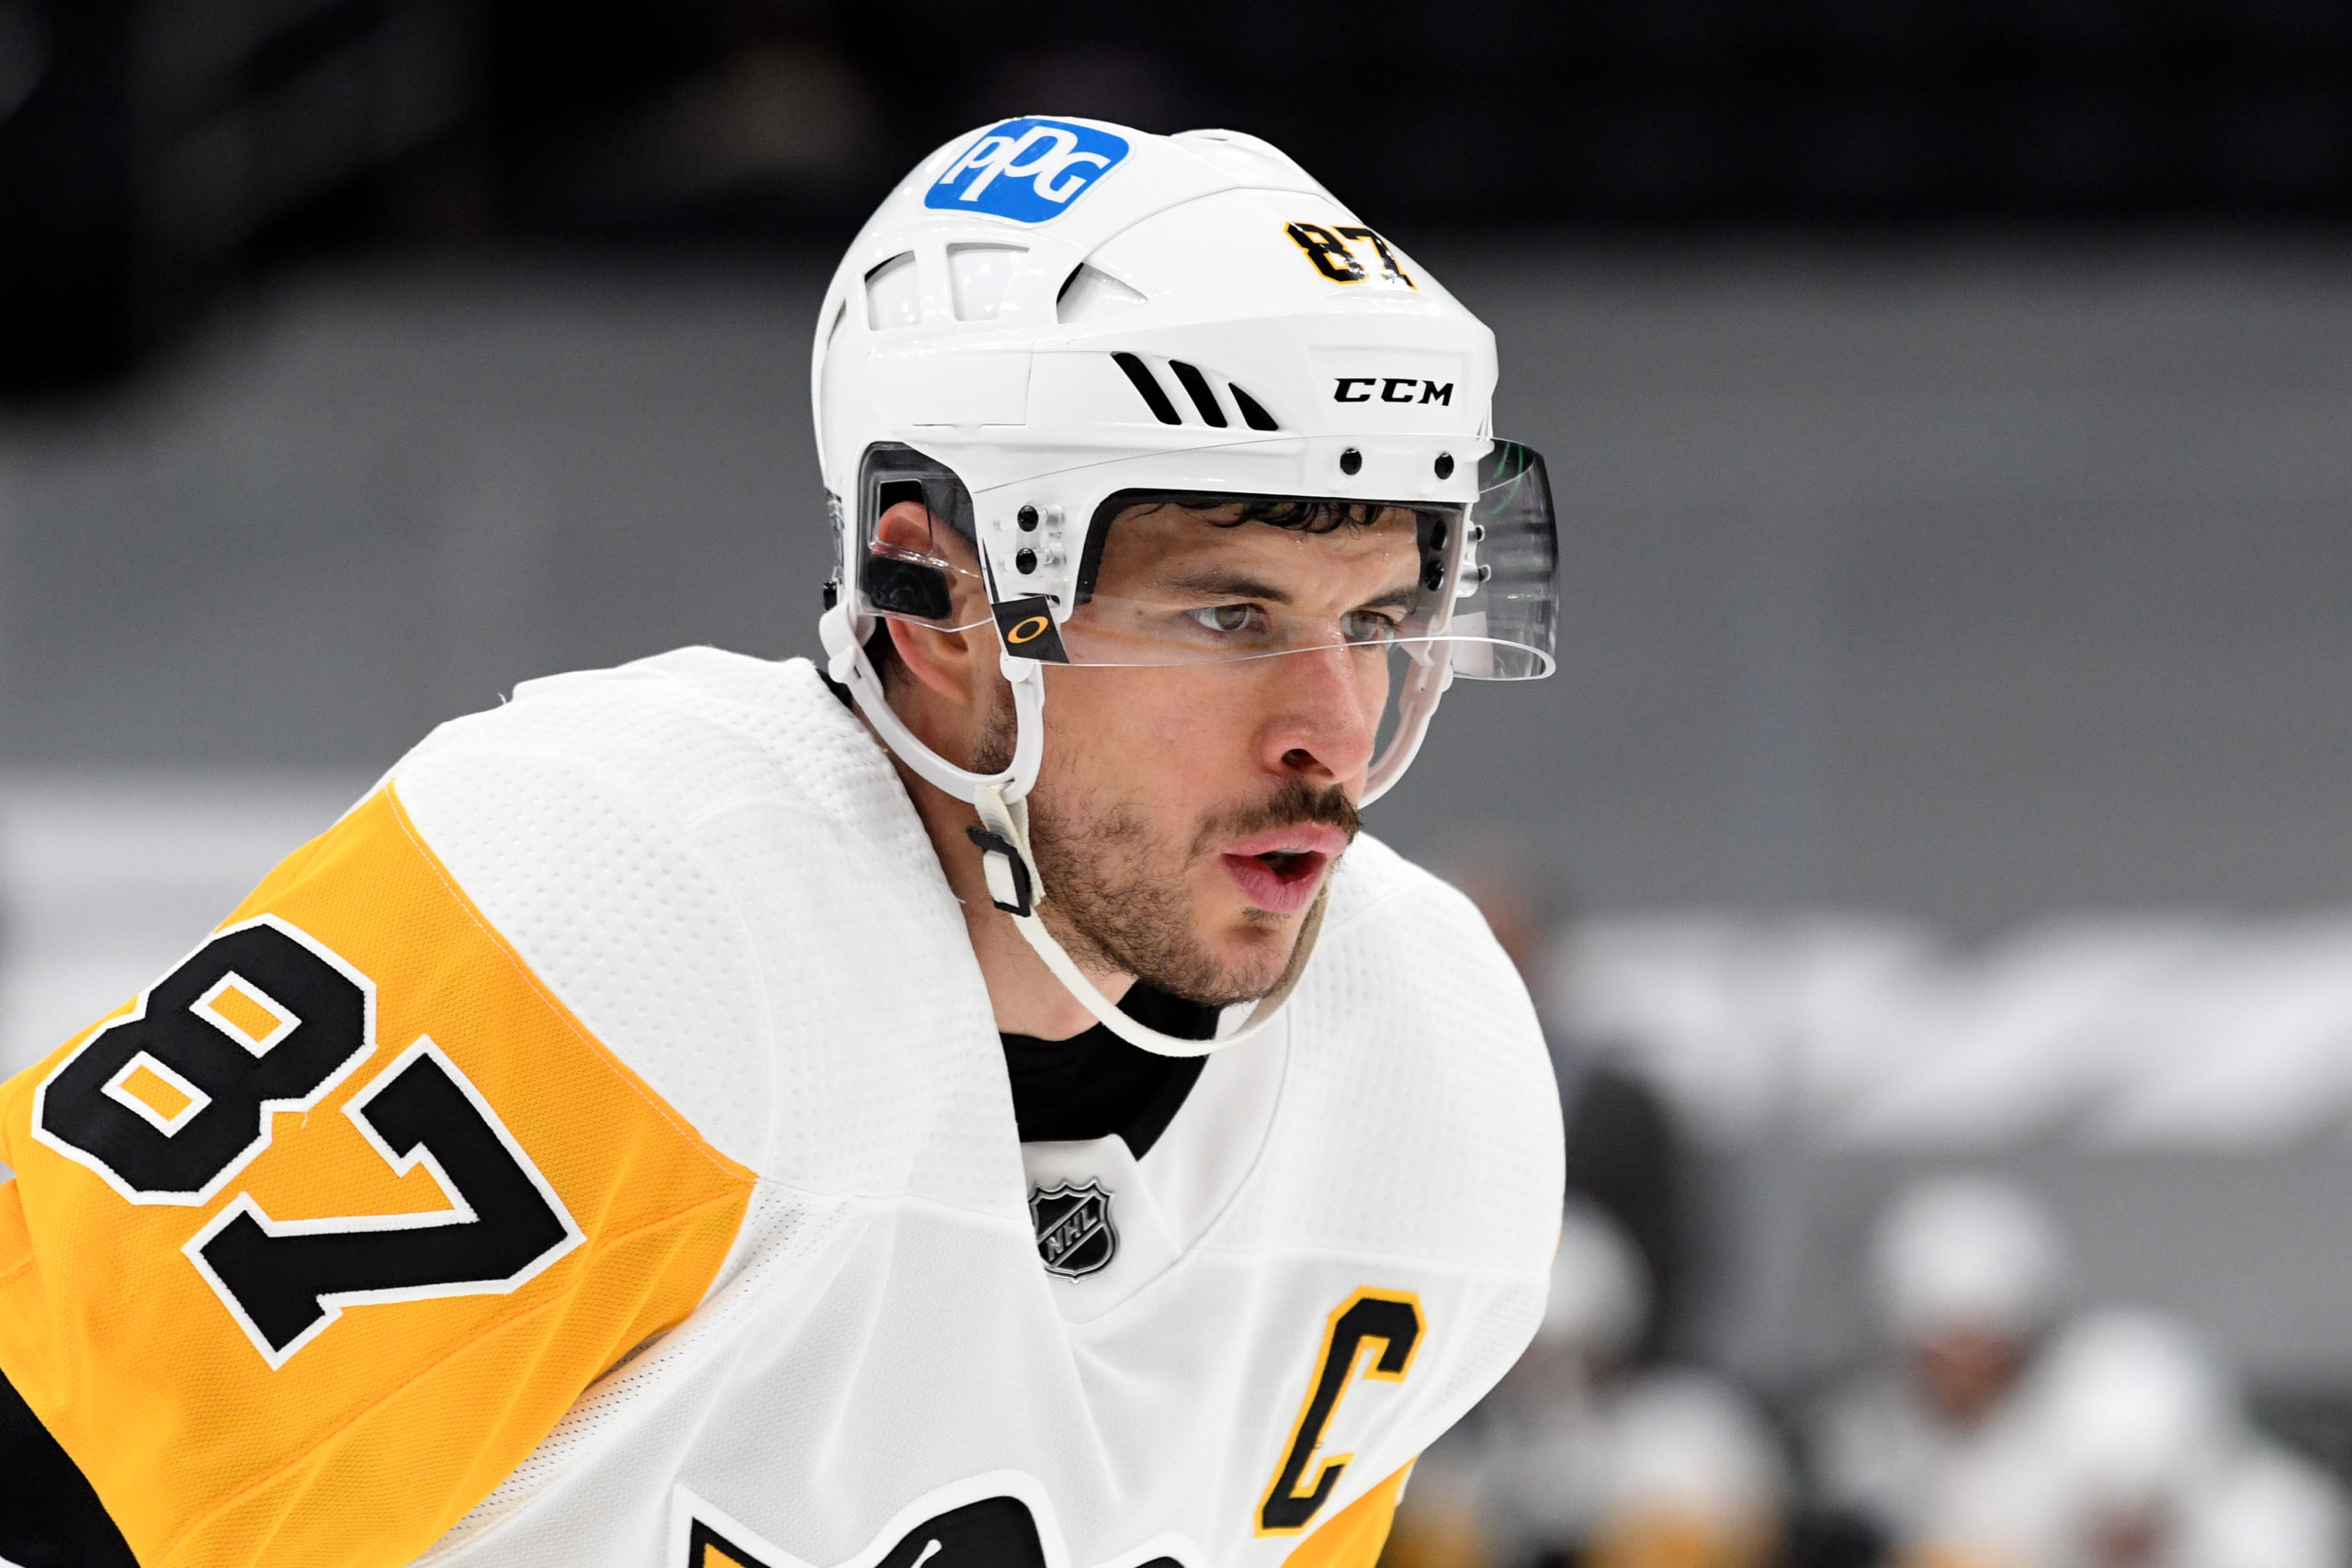 Penguins Show Resilience, Resolve Through Adversity with OT Win